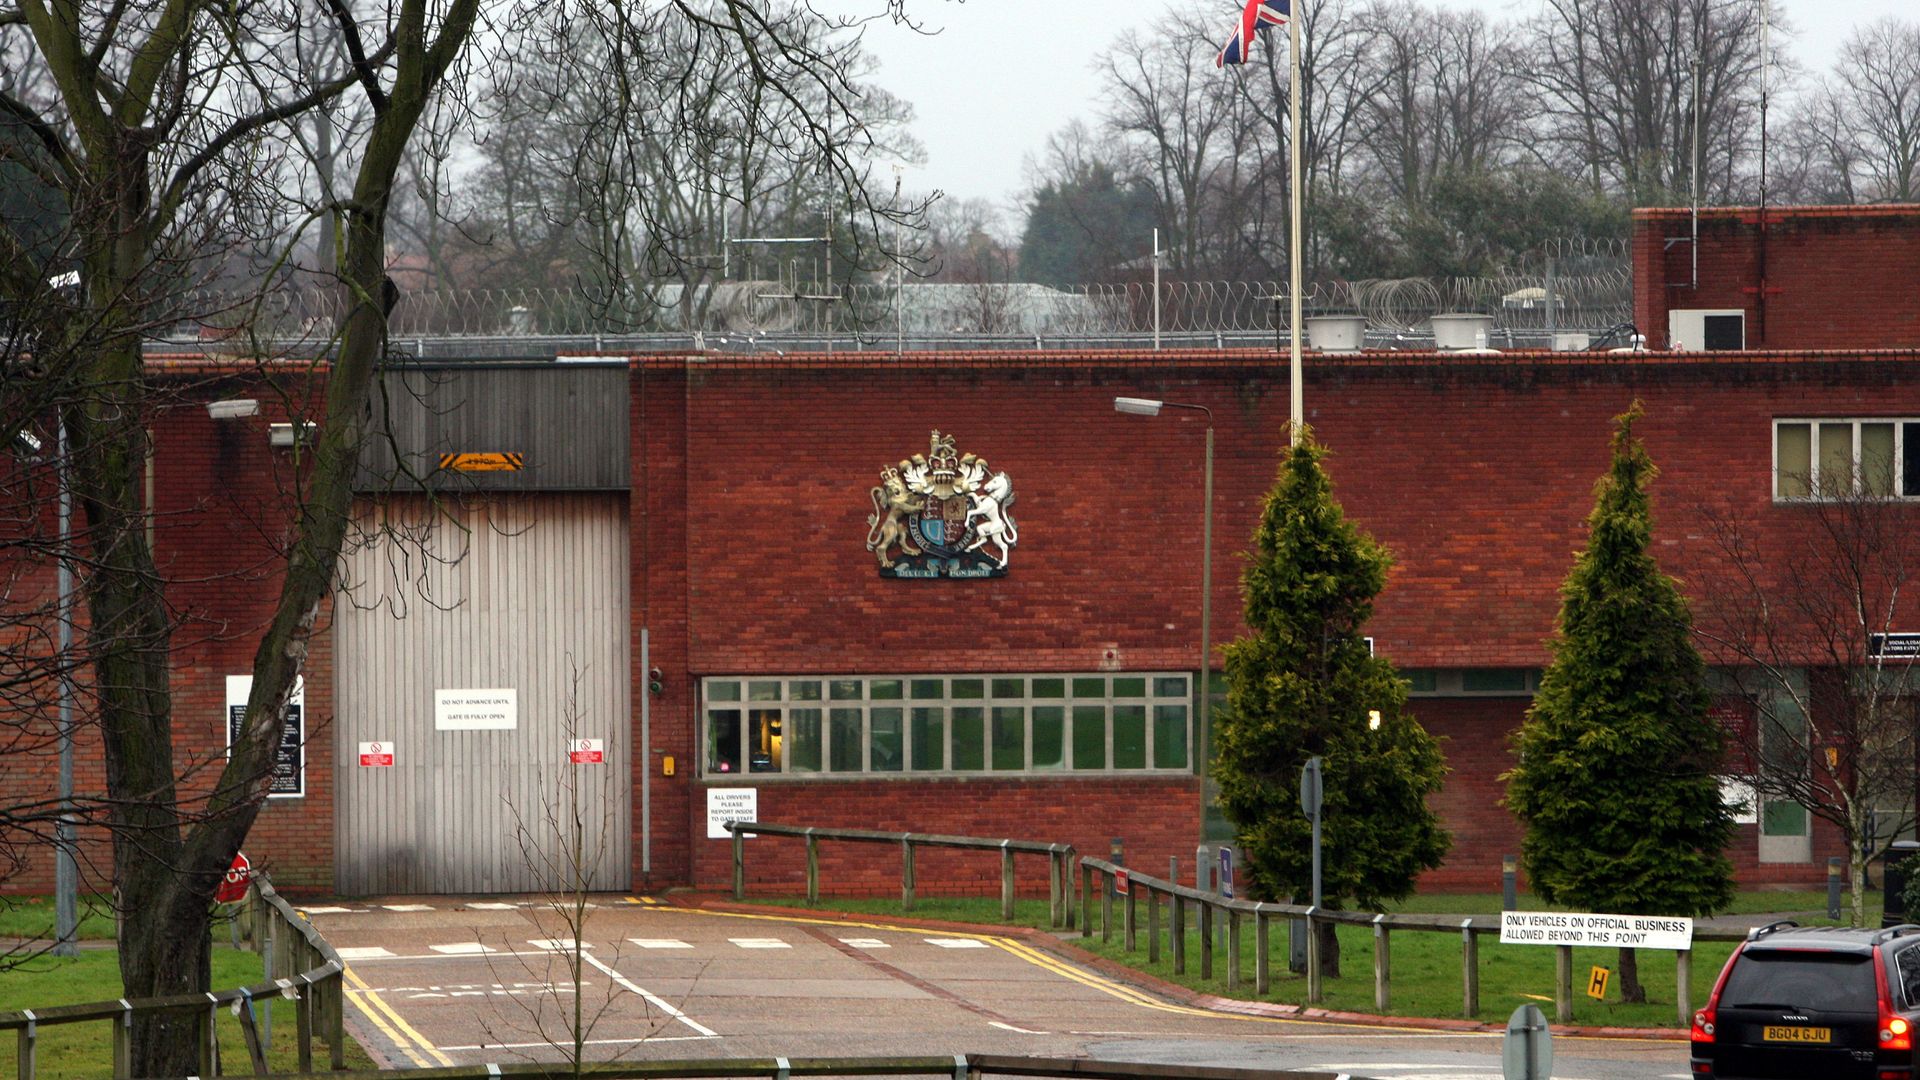 Troubled youth prison is now 'most violent' jail in England